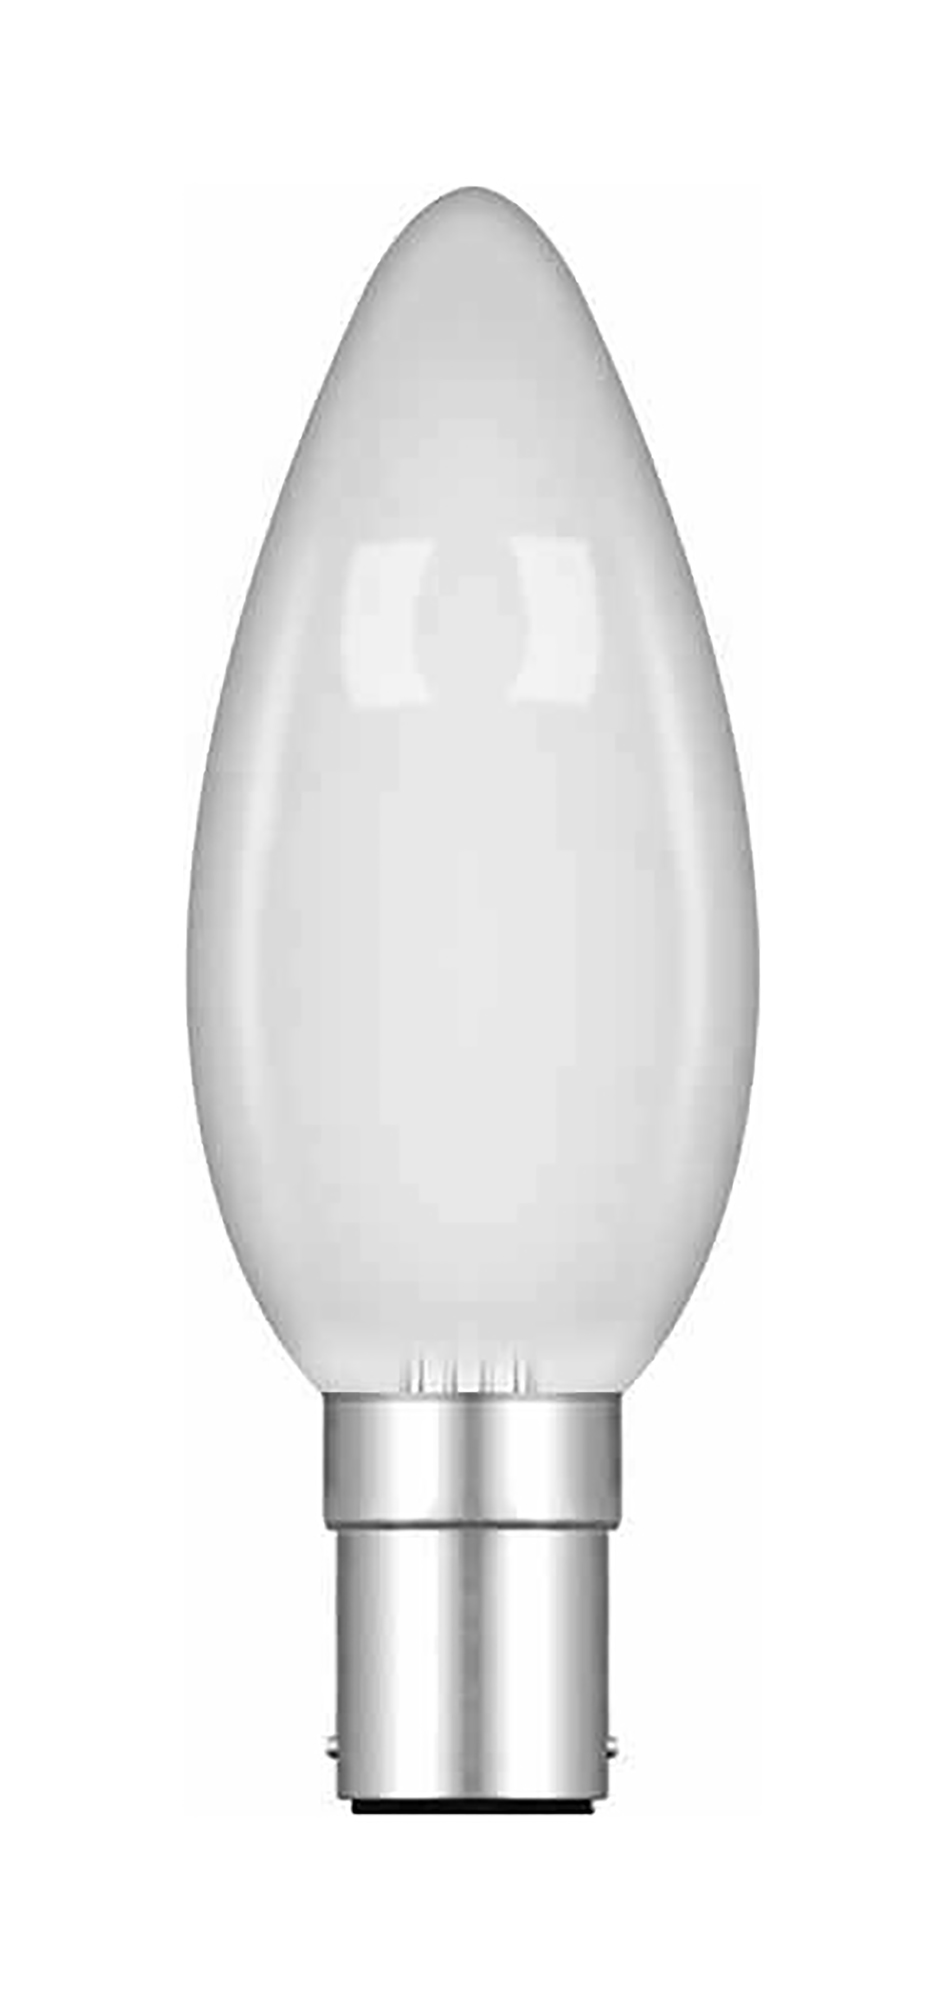 Candle B15 35mm Incandescent Luxram Candle